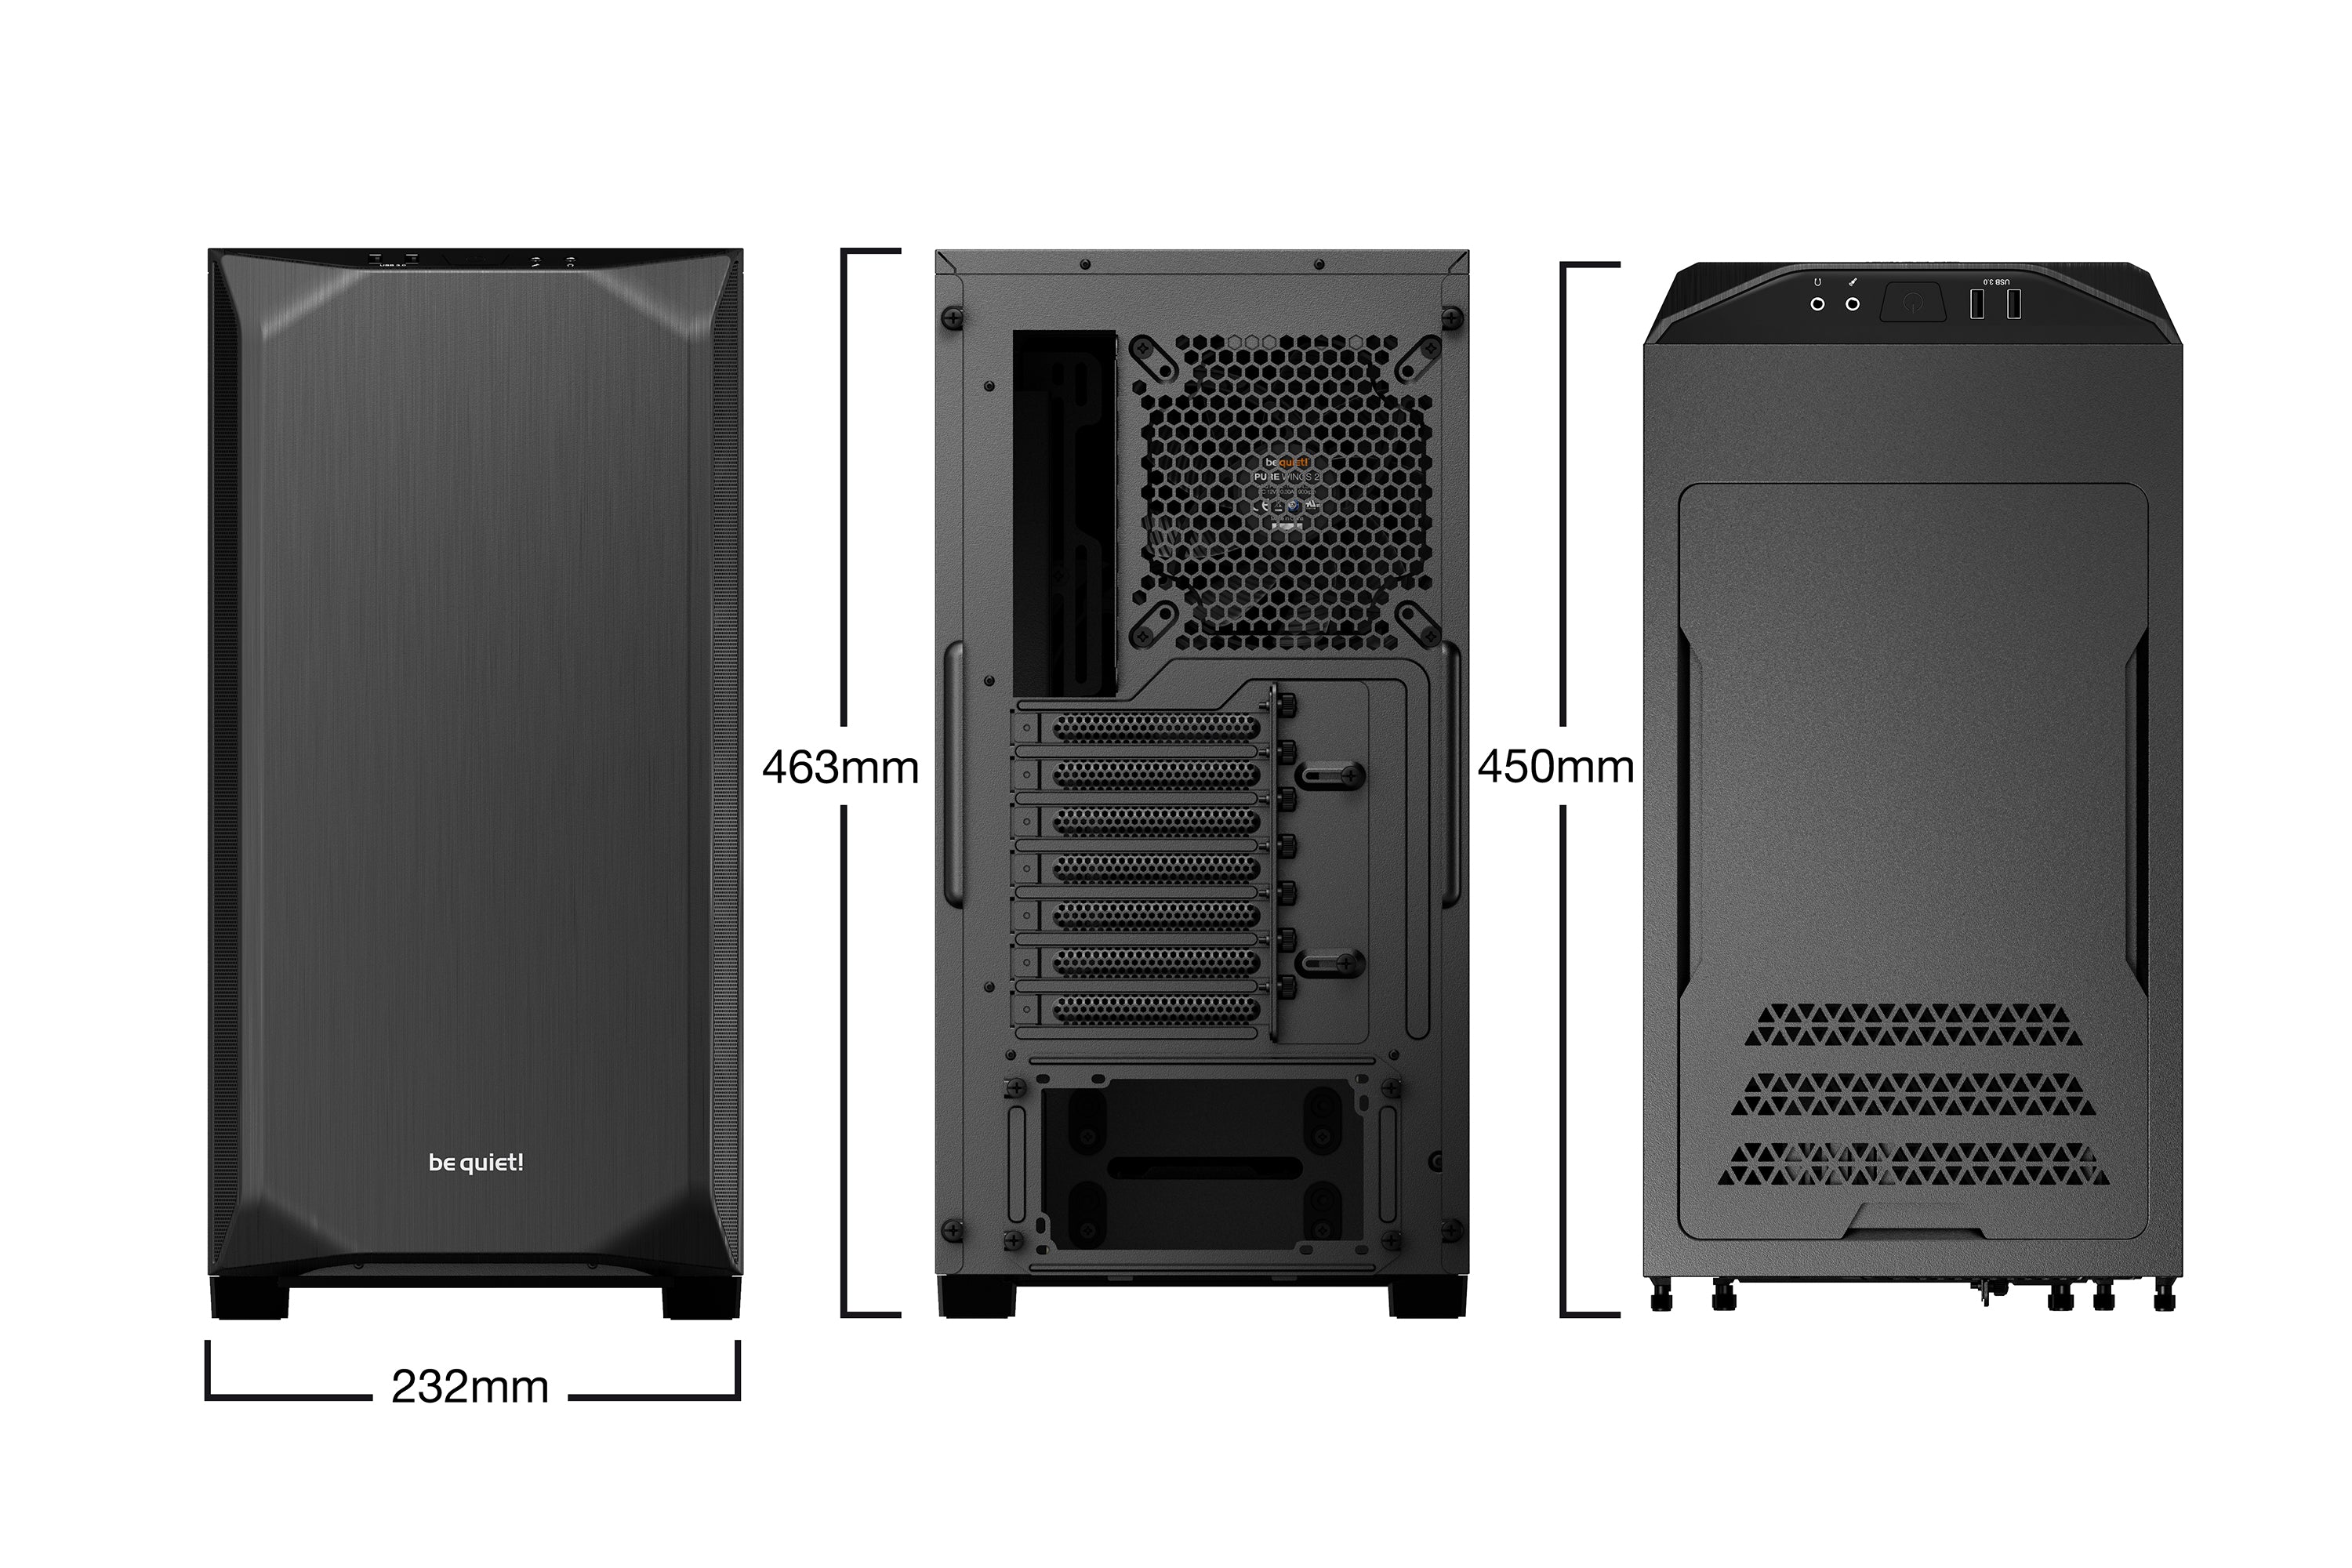 Be Quiet! PURE BASE 500 Windows TOWER Case